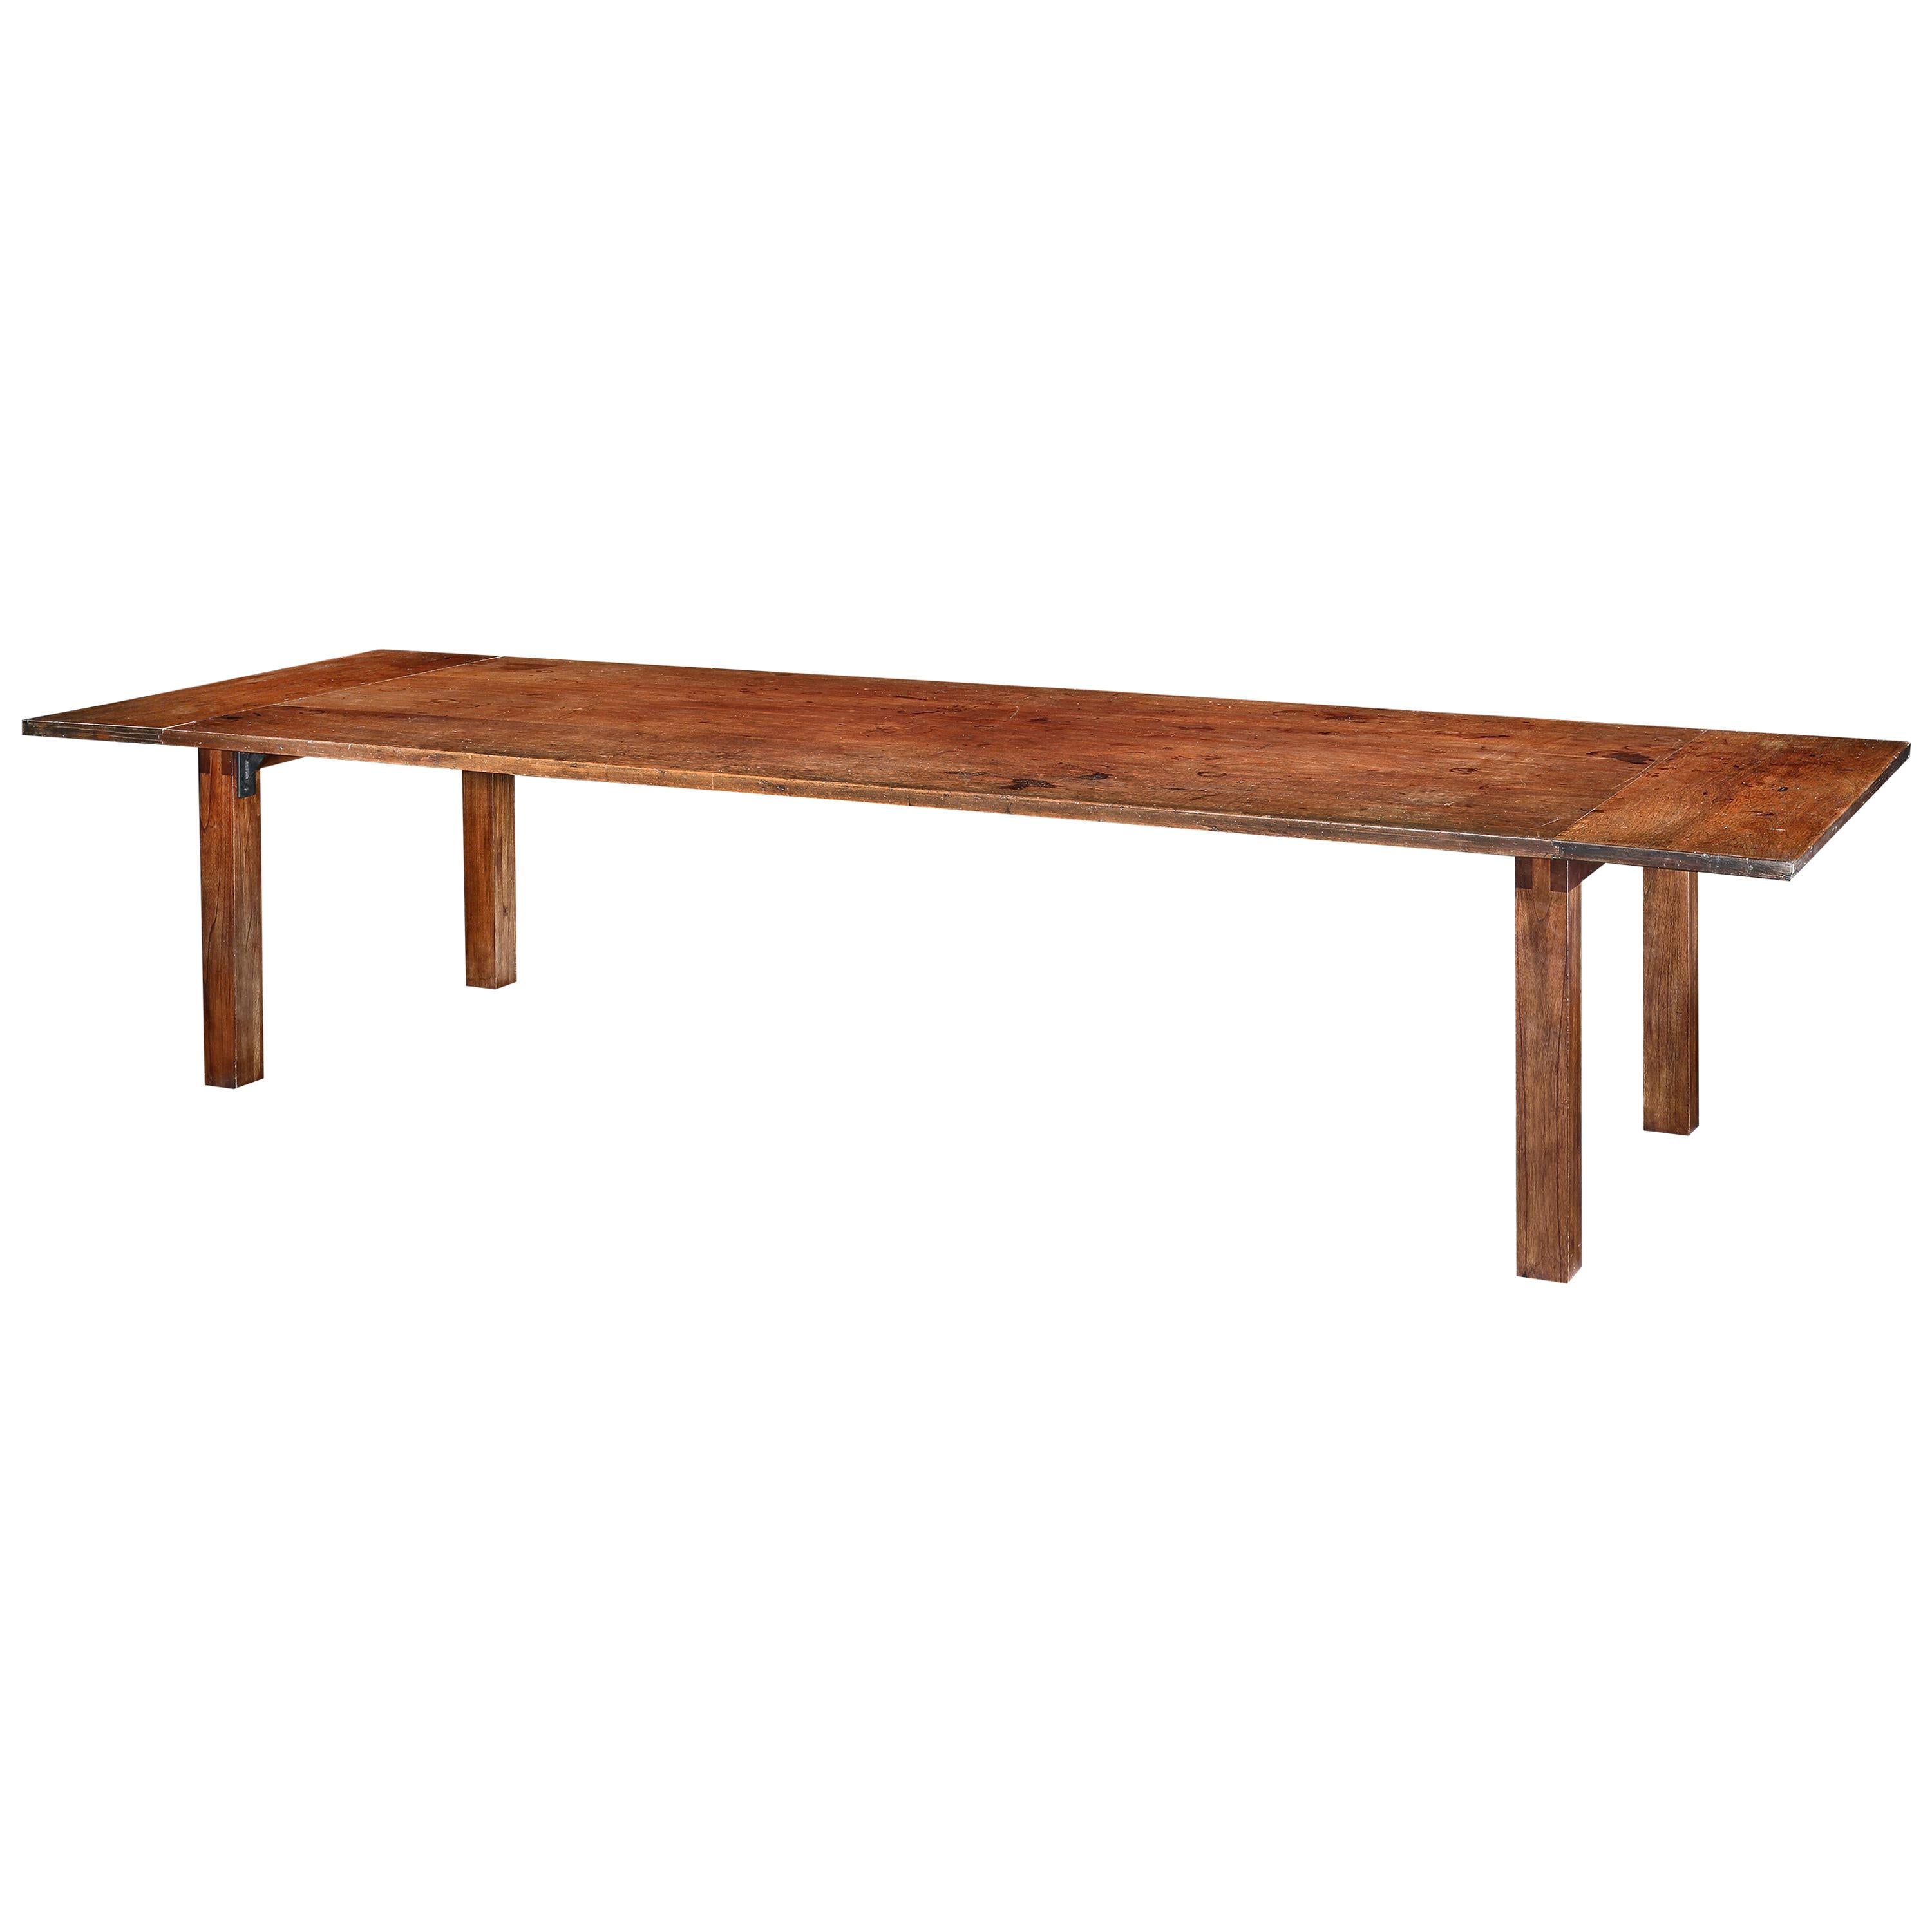 Table Dining Writing Library Boardroom Teak 20-24-seat, 1950, 12ft long 4ft wide